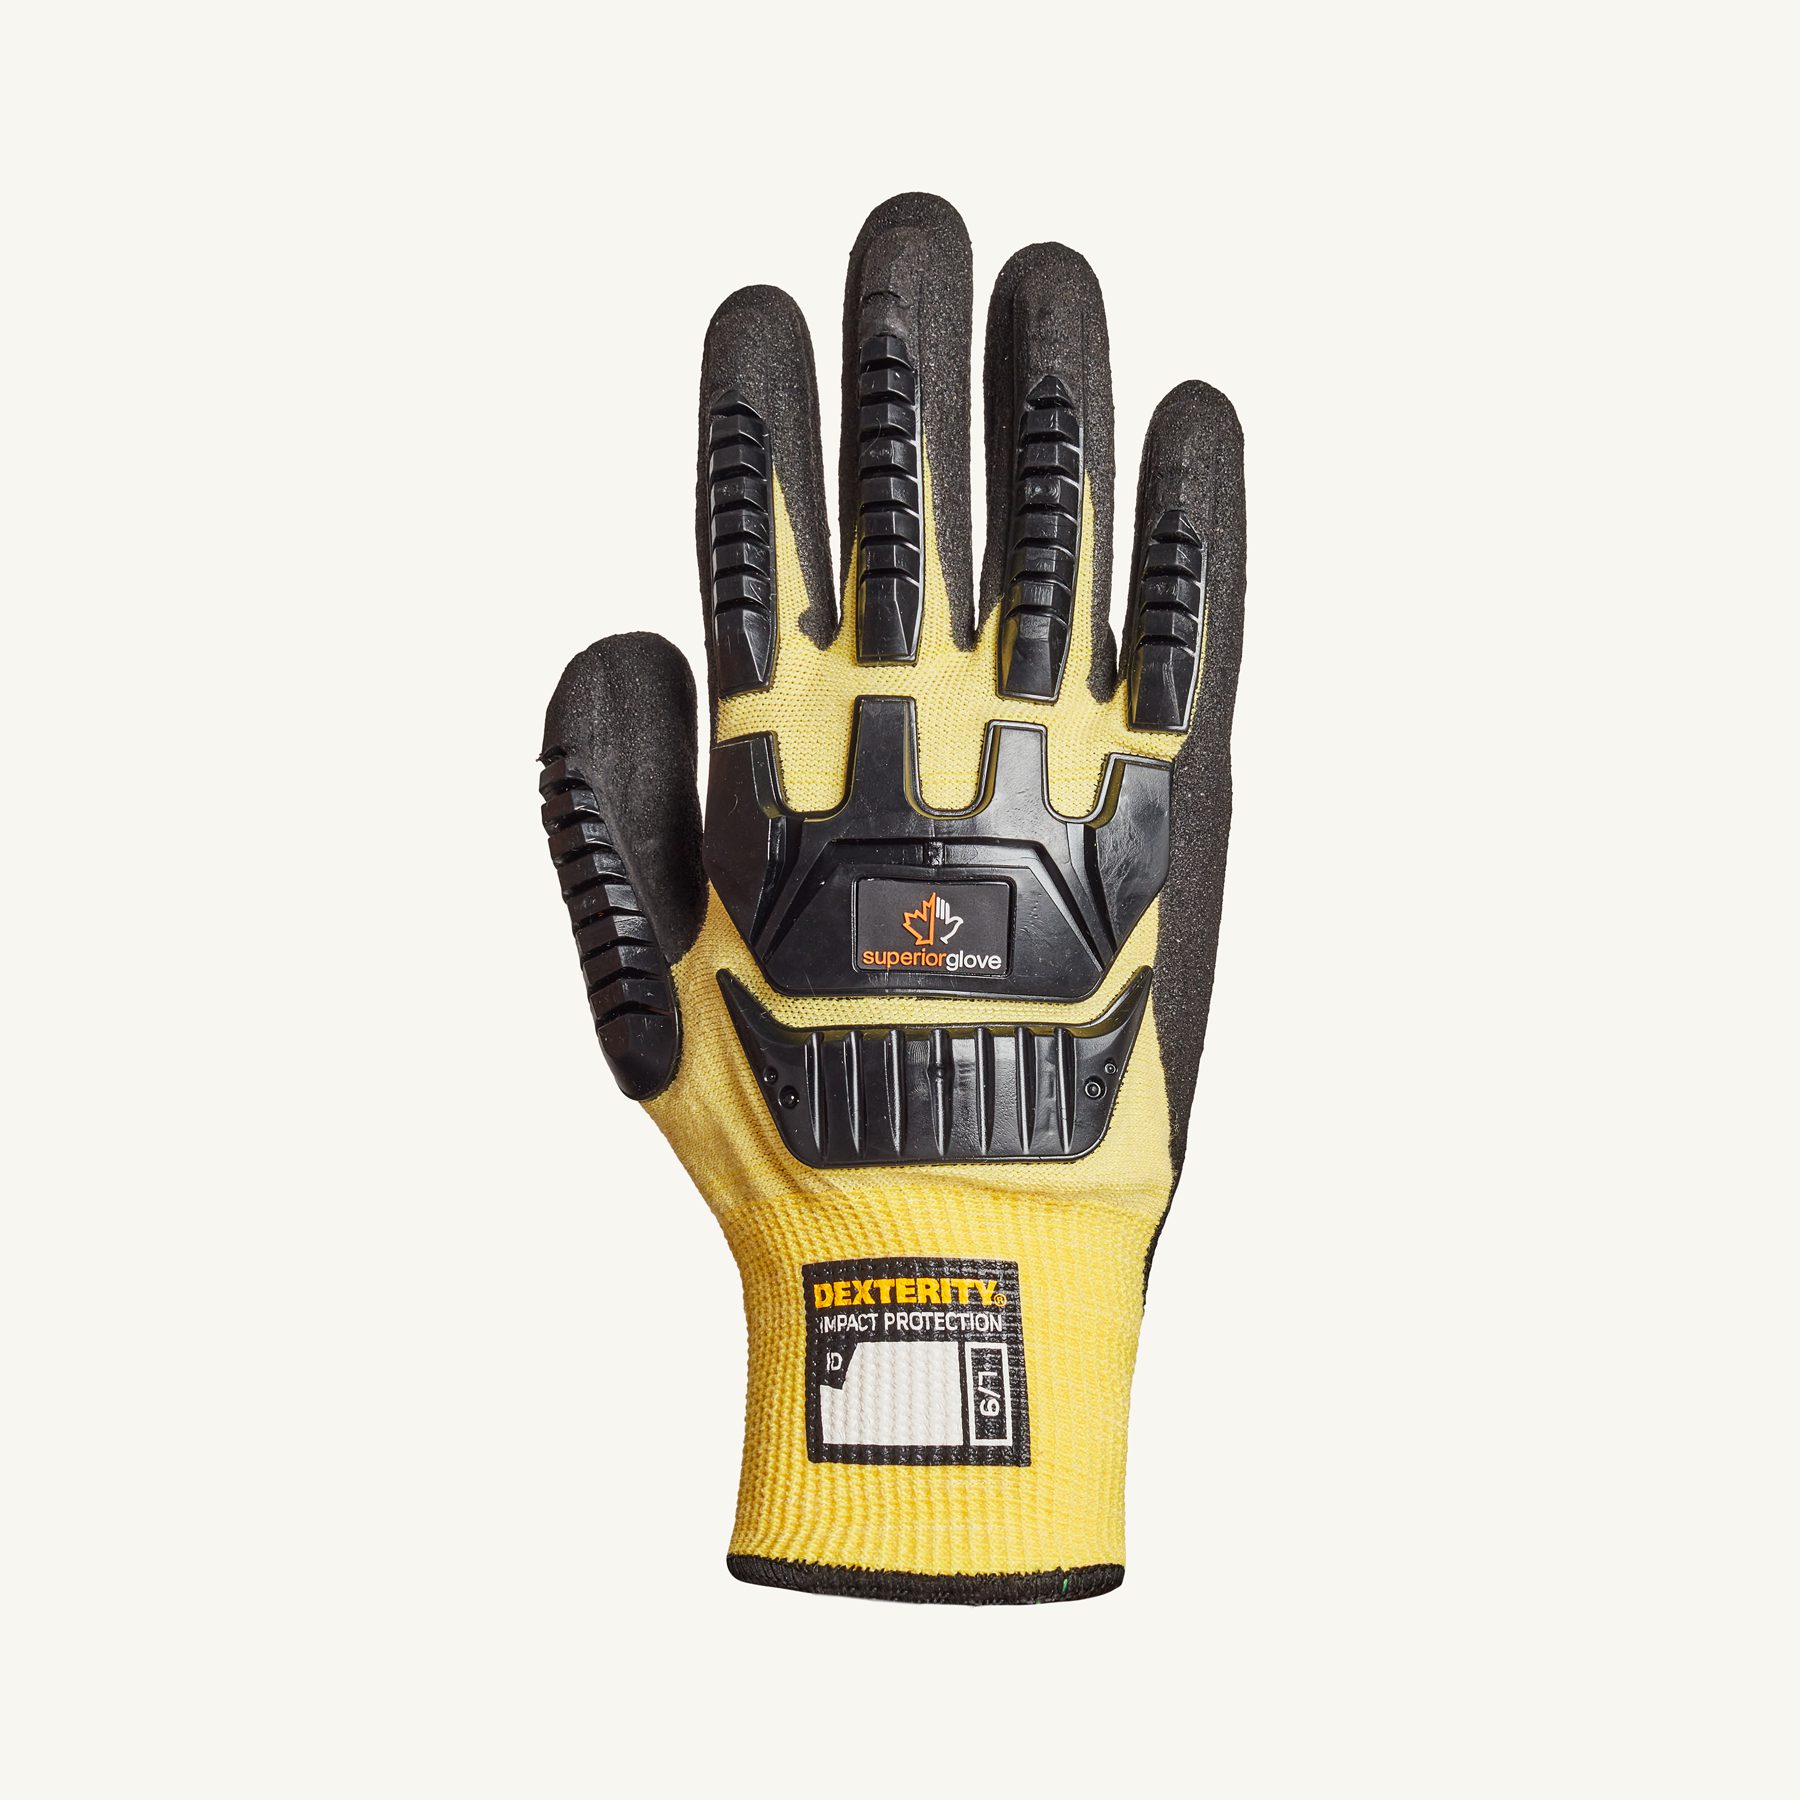 Dexterity® Impact and oil-resistant gloves with 360° cut protection